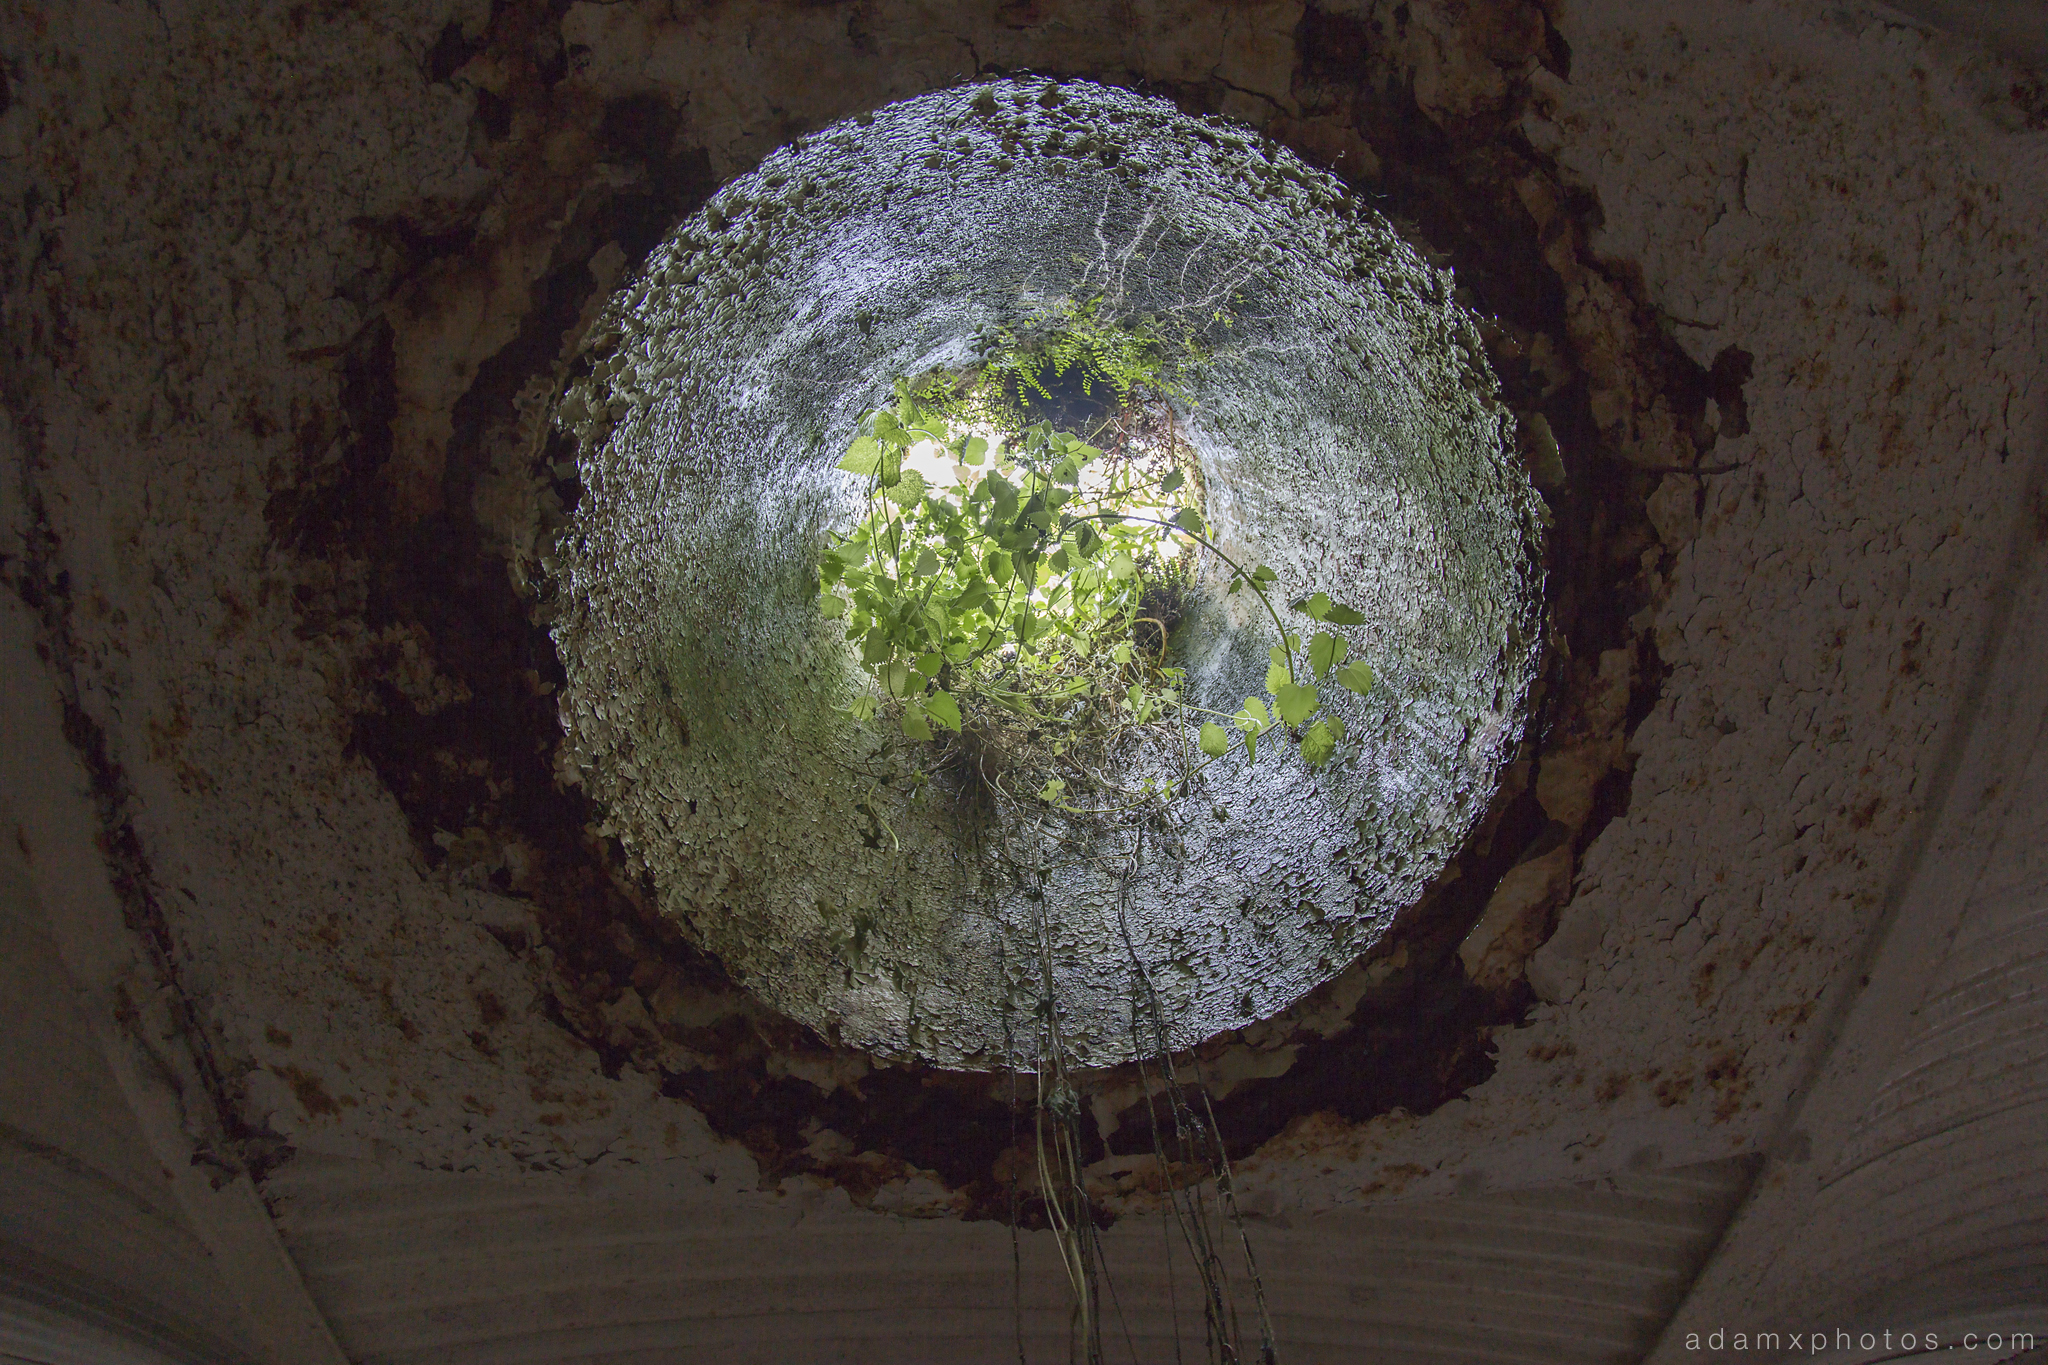 Underwater Ballroom Witley Adam X Whitaker Wright Urbex Urban Exploration skylight light hole green overgrowth photo photos report decay detail glass windows UE abandoned derelict unused empty disused decay decayed decaying grimy grime